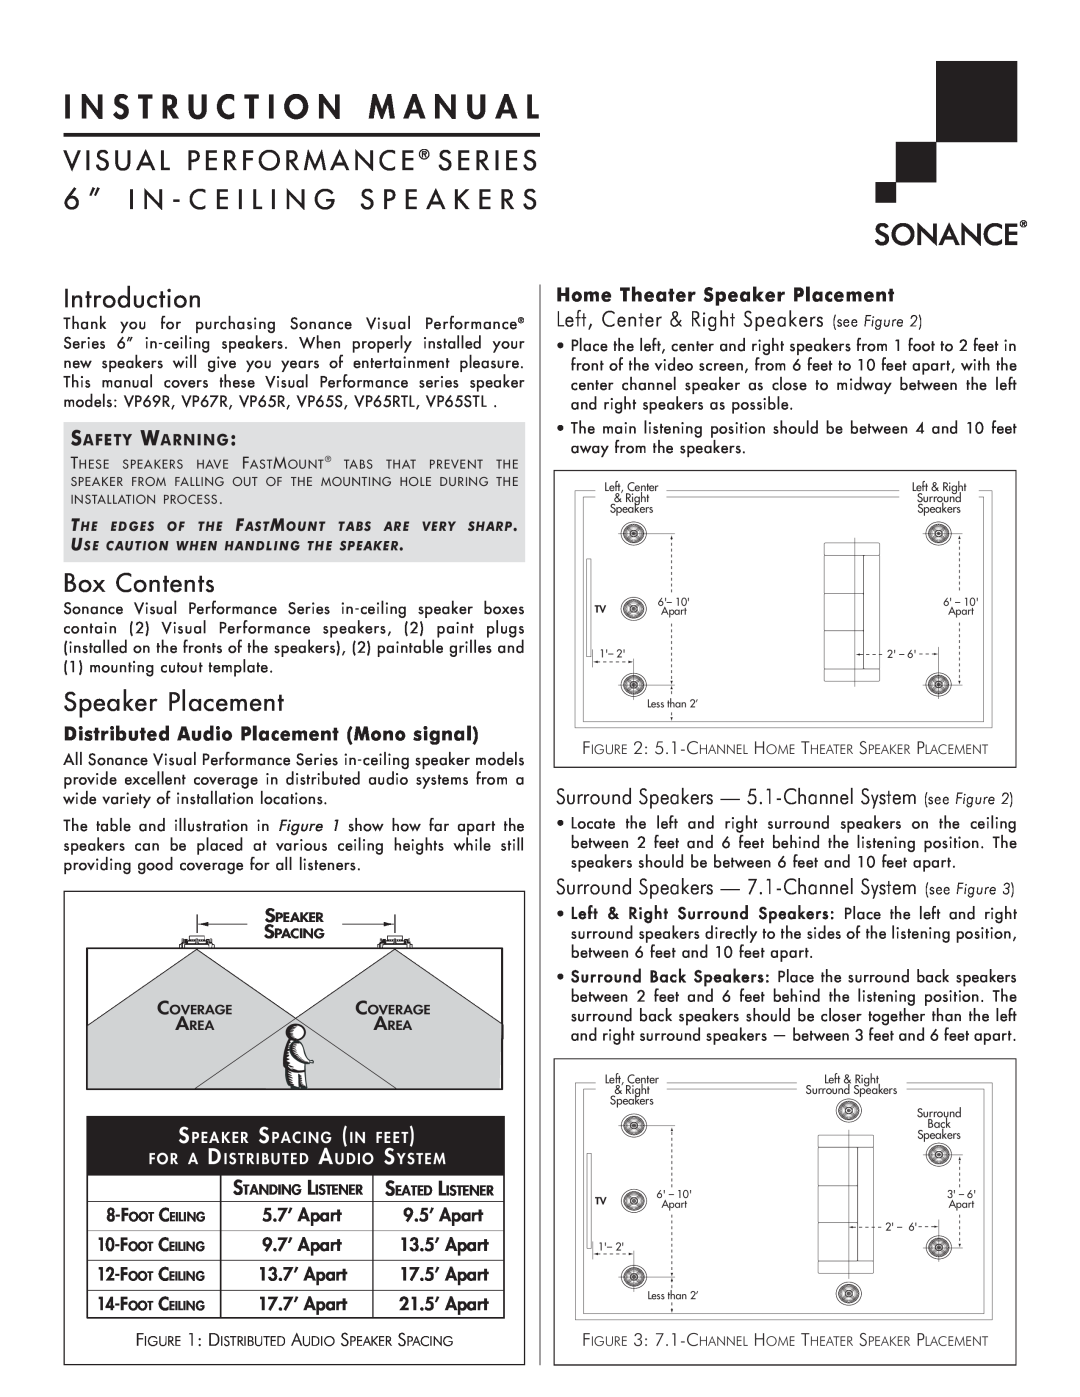 Sonance VP89R instruction manual Introduction, Box Contents, Speaker Placement, Left, Center & Right Speakers see Figure 